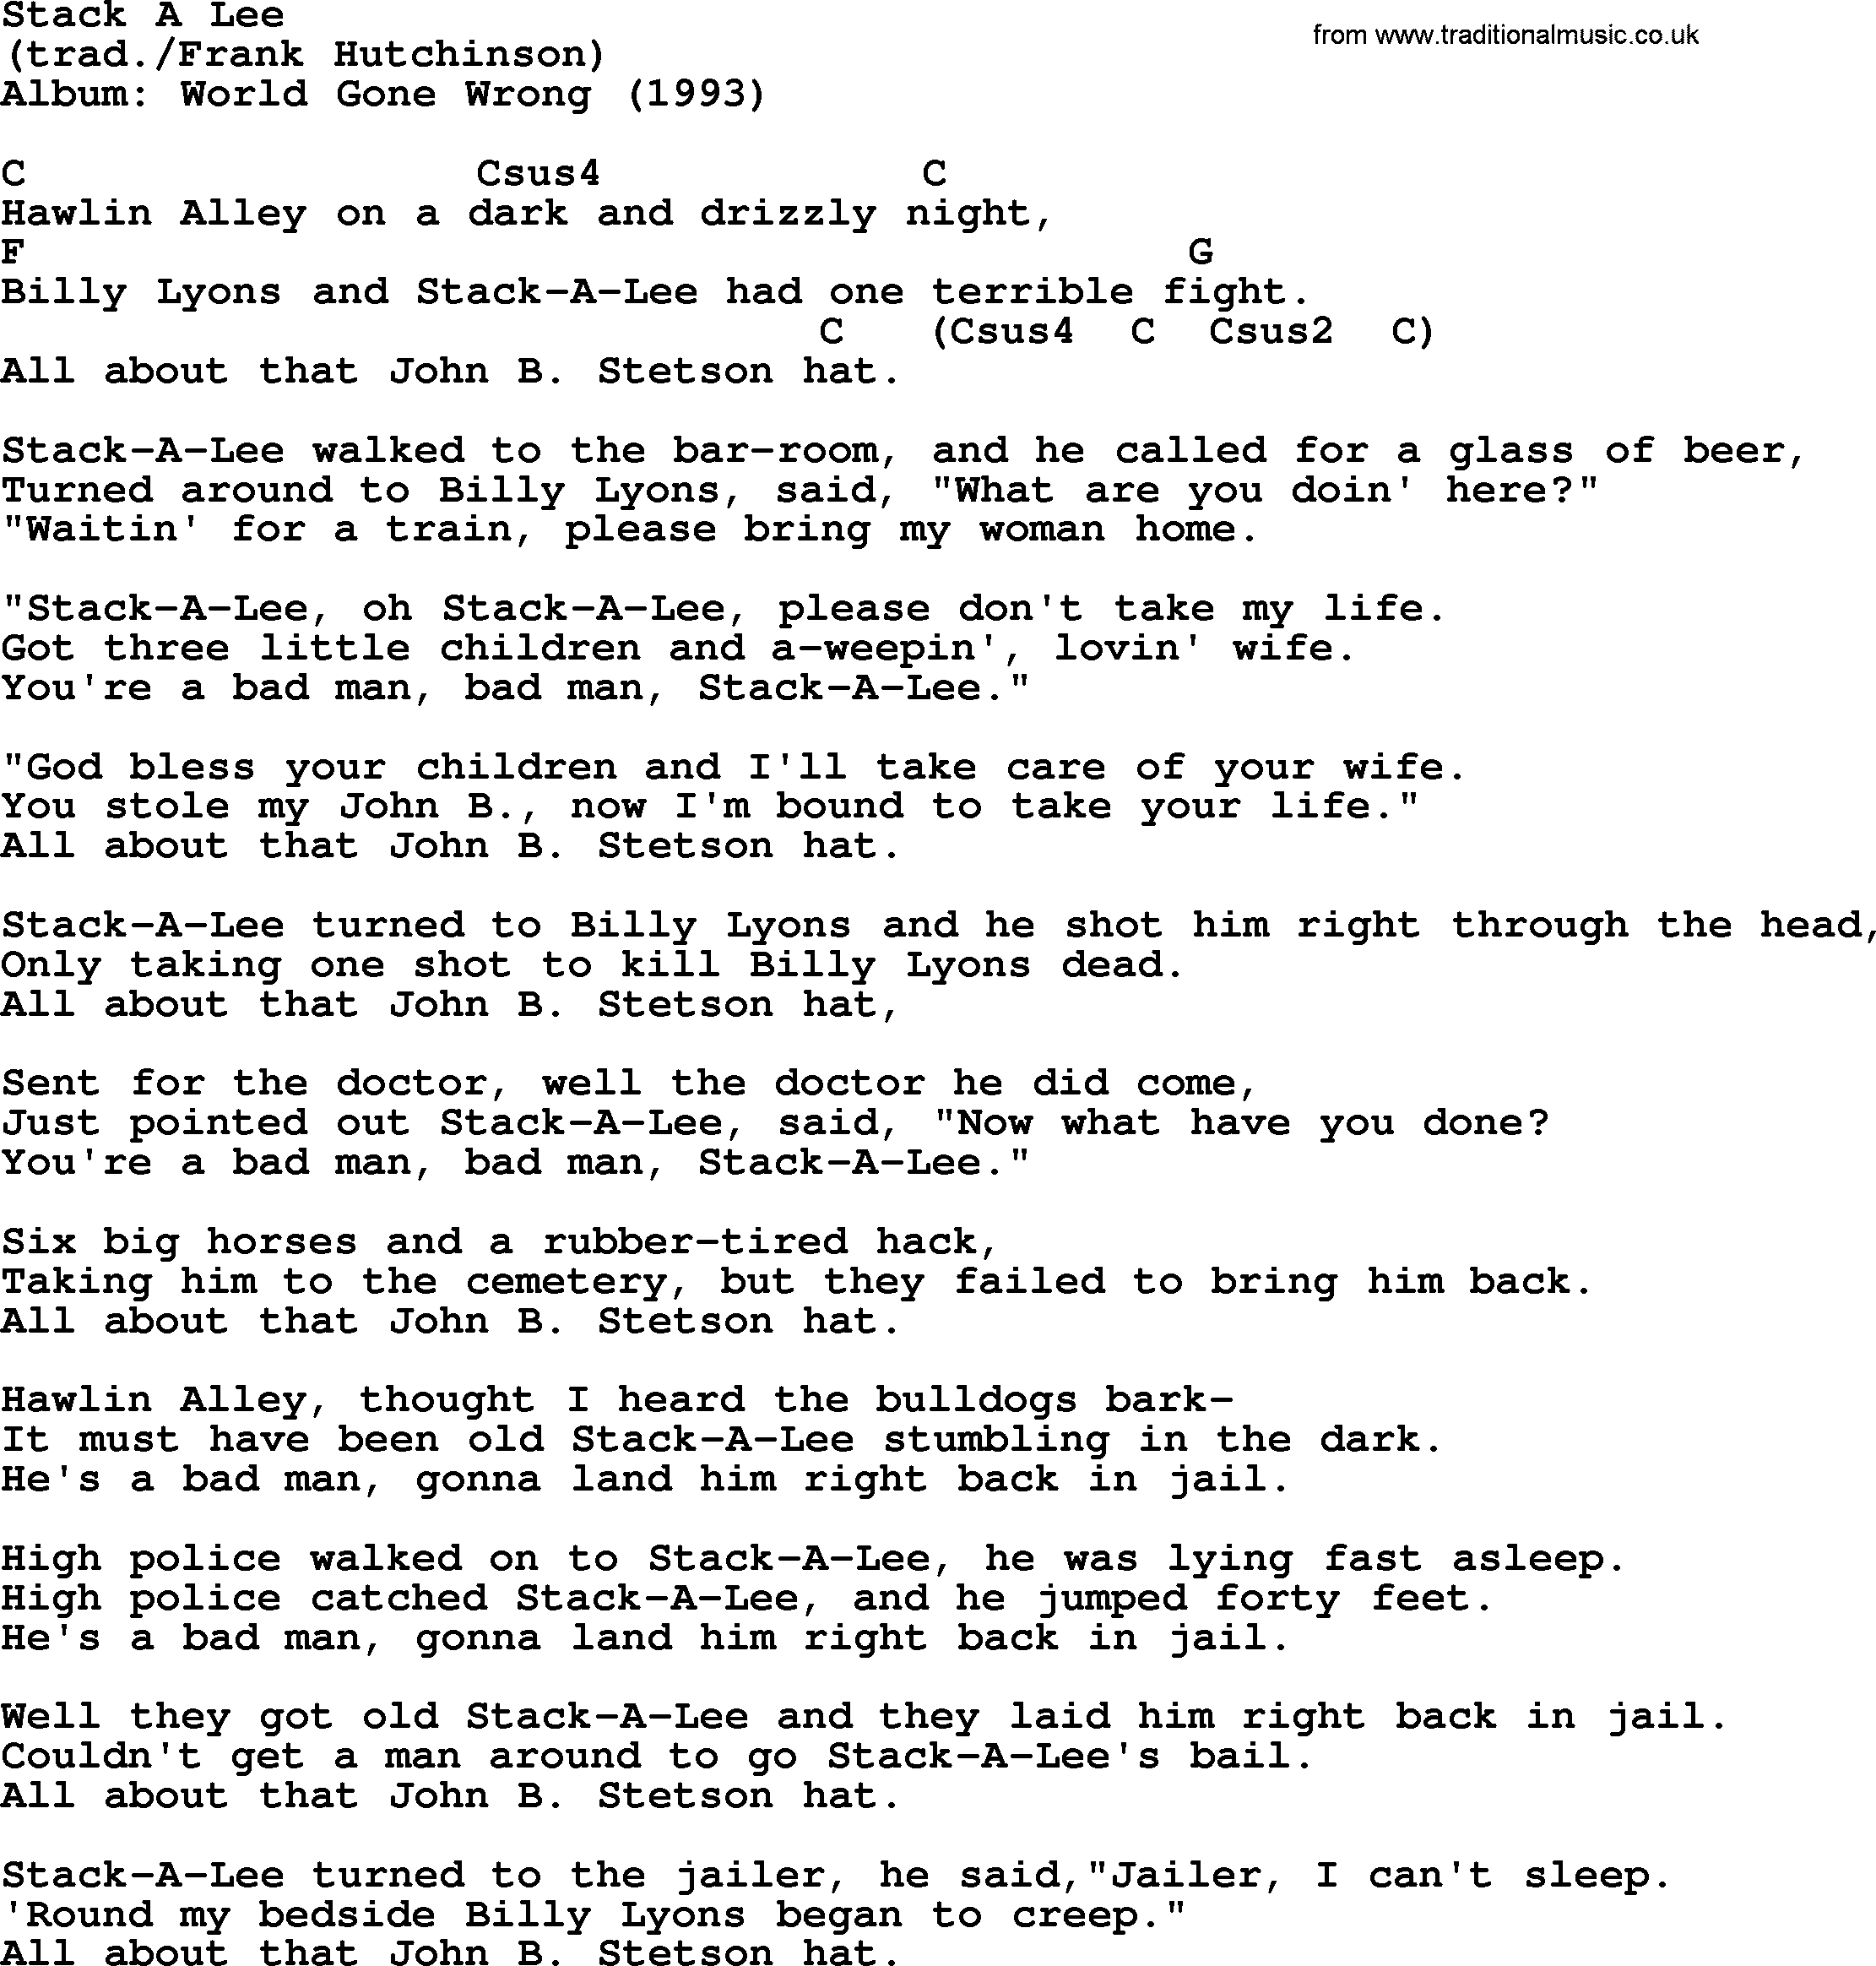 Bob Dylan song, lyrics with chords - Stack A Lee